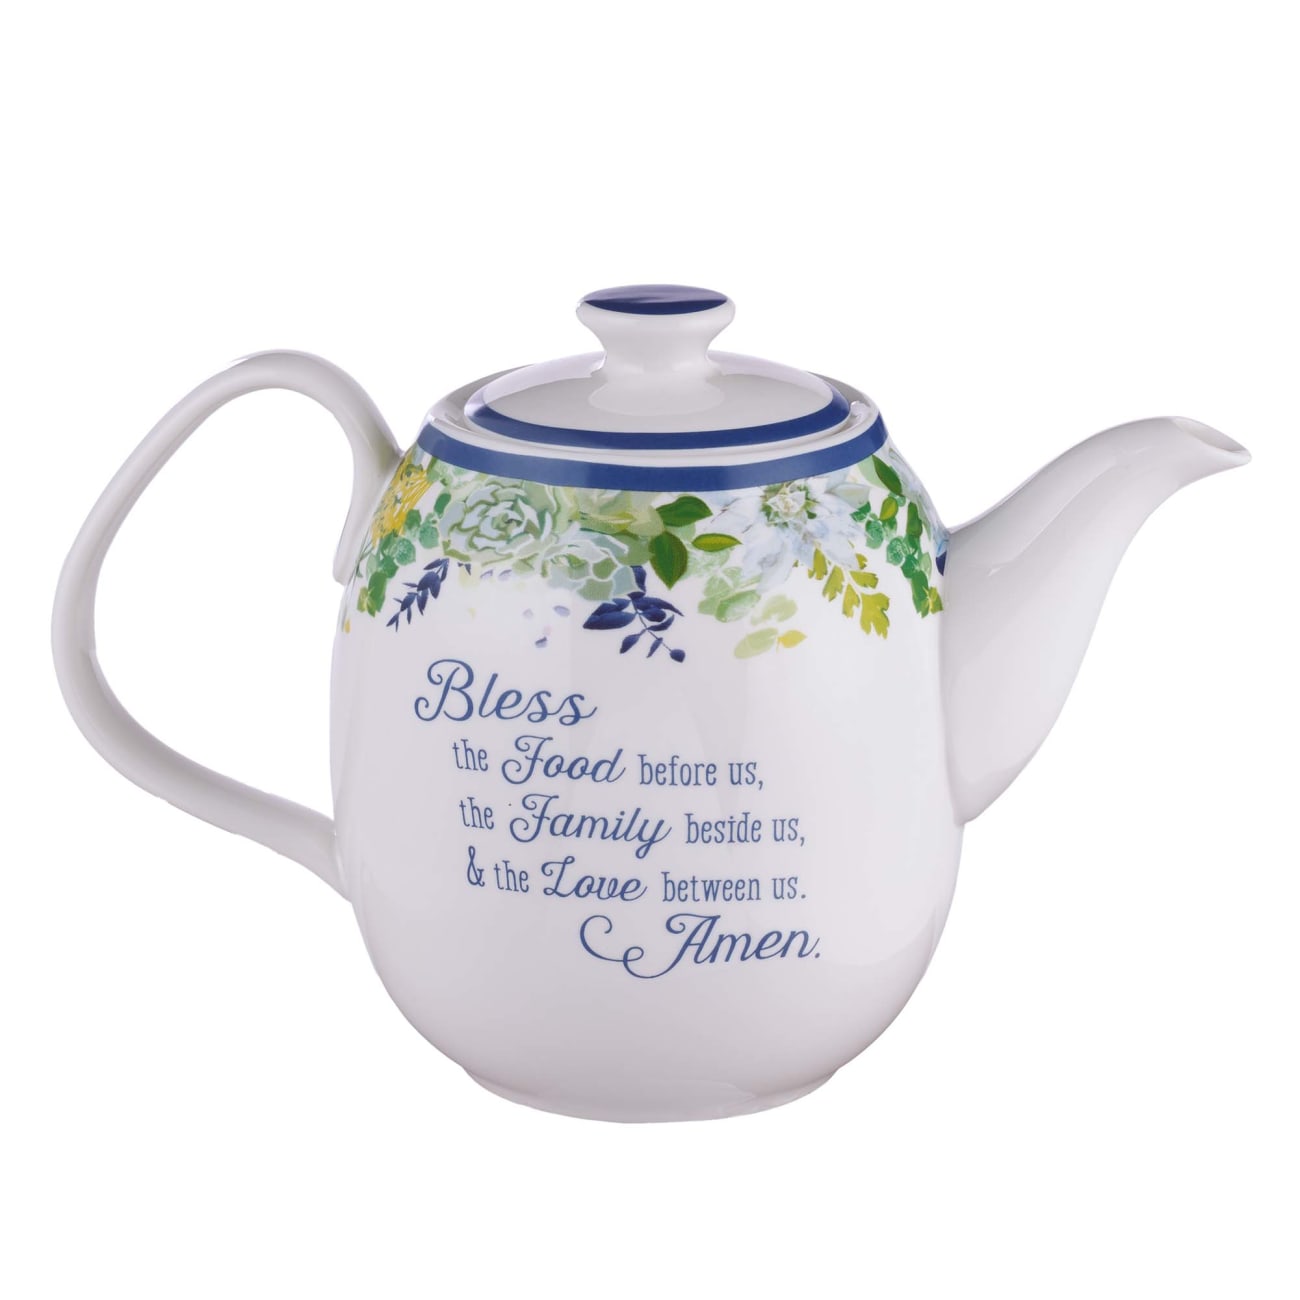 Ceramic Teapot: Our Daily Bread, Blue/White/Floral (Matt 6:11) (Our Daily Bread Collection) Homeware